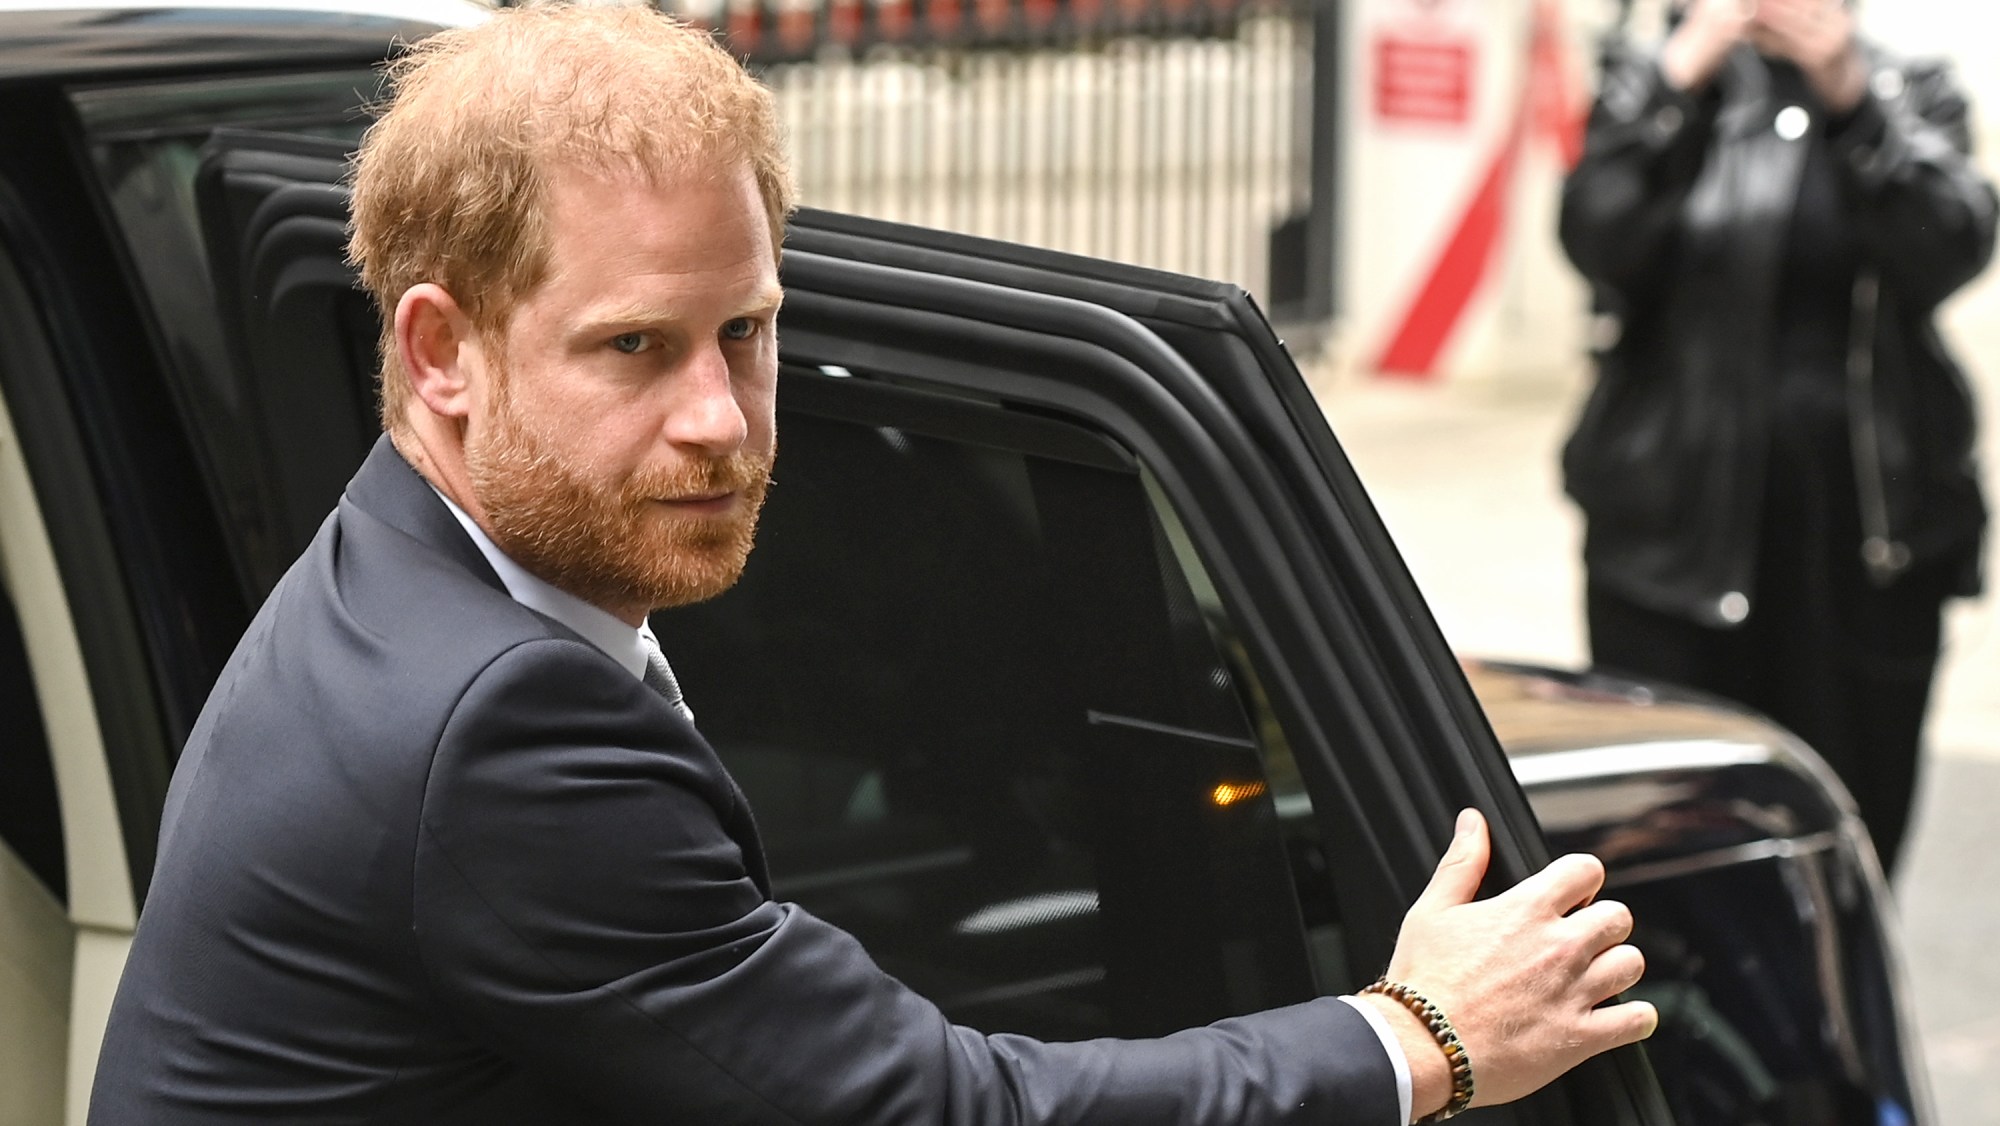 Prince Harry Attributes Royal Family Rift to Battle Against British Tabloids